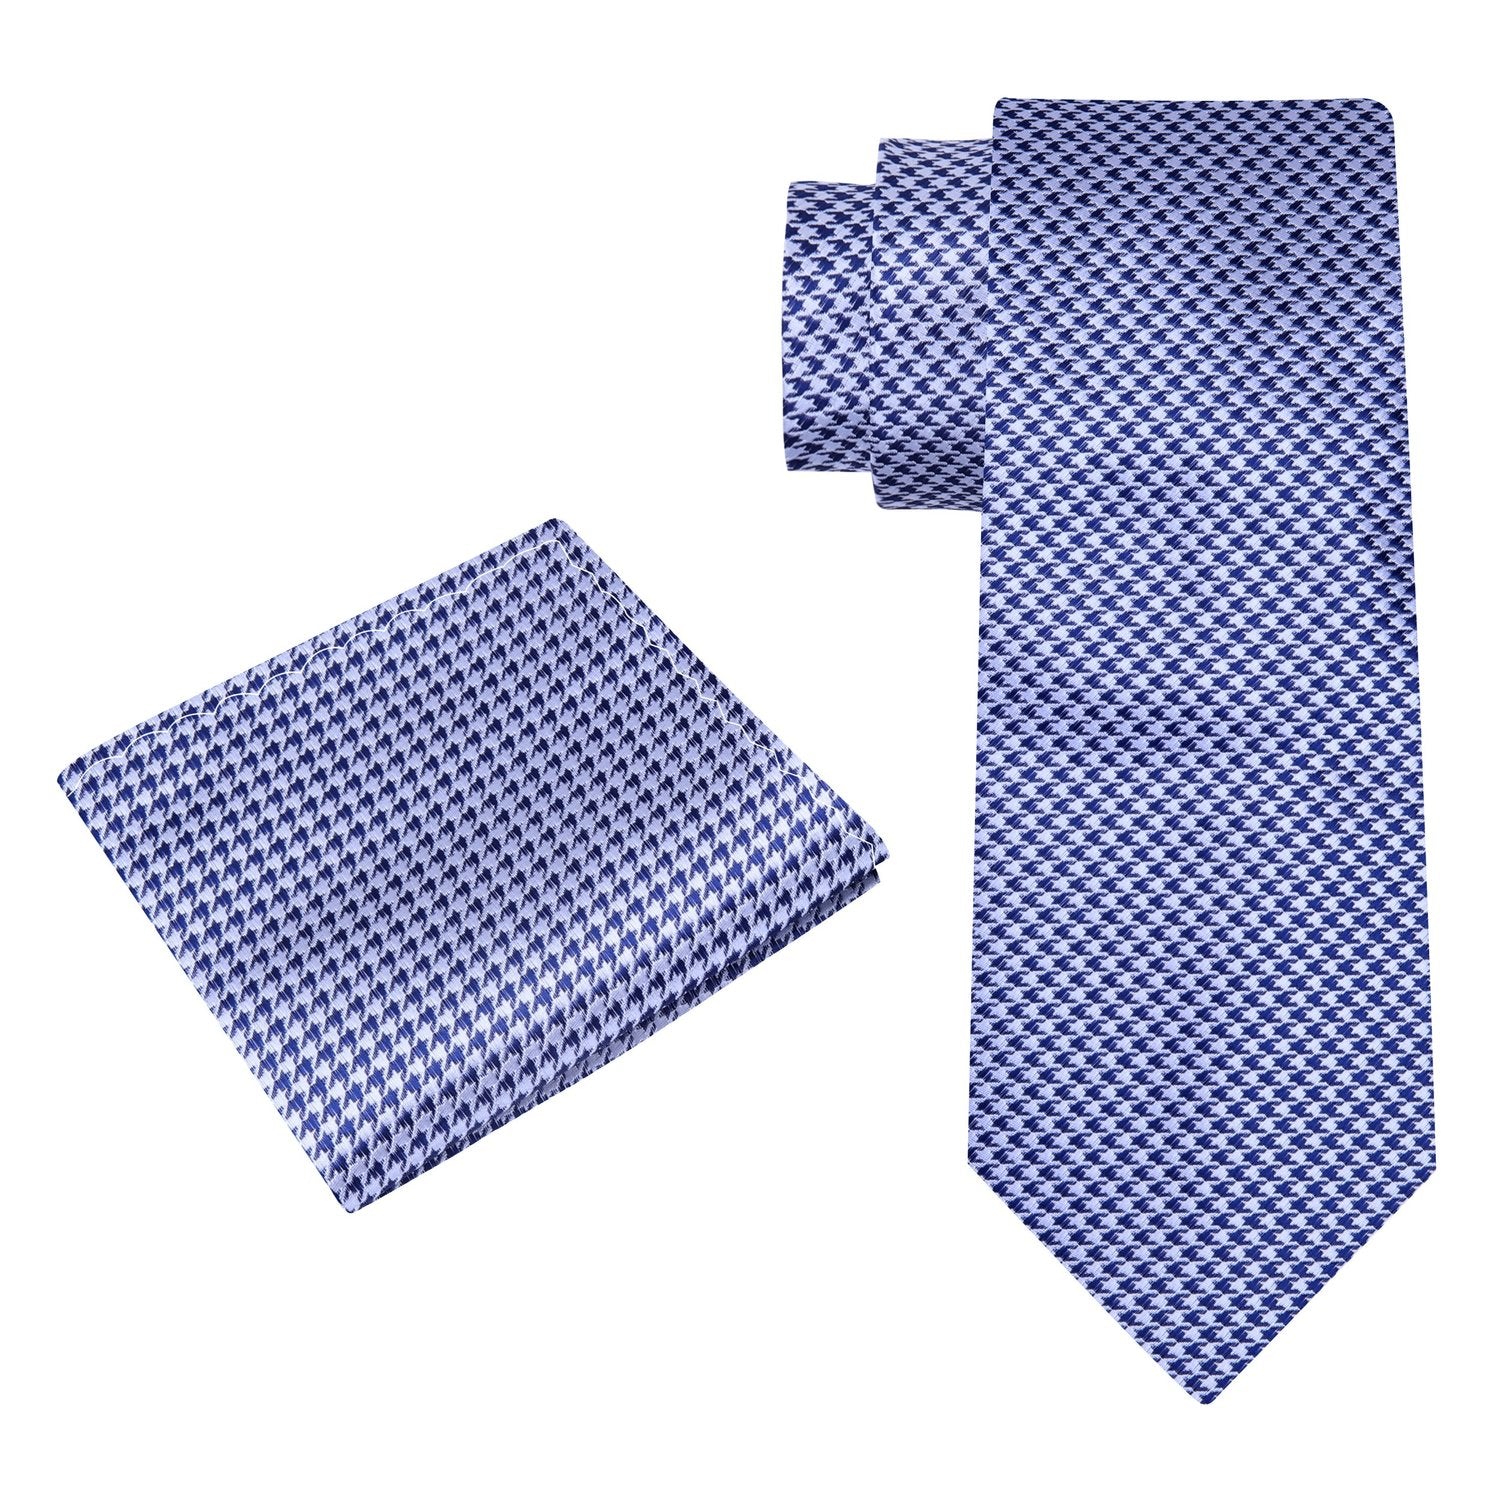 Alt View: Blue/Light Silver Hounds Tooth Tie and Pocket Square